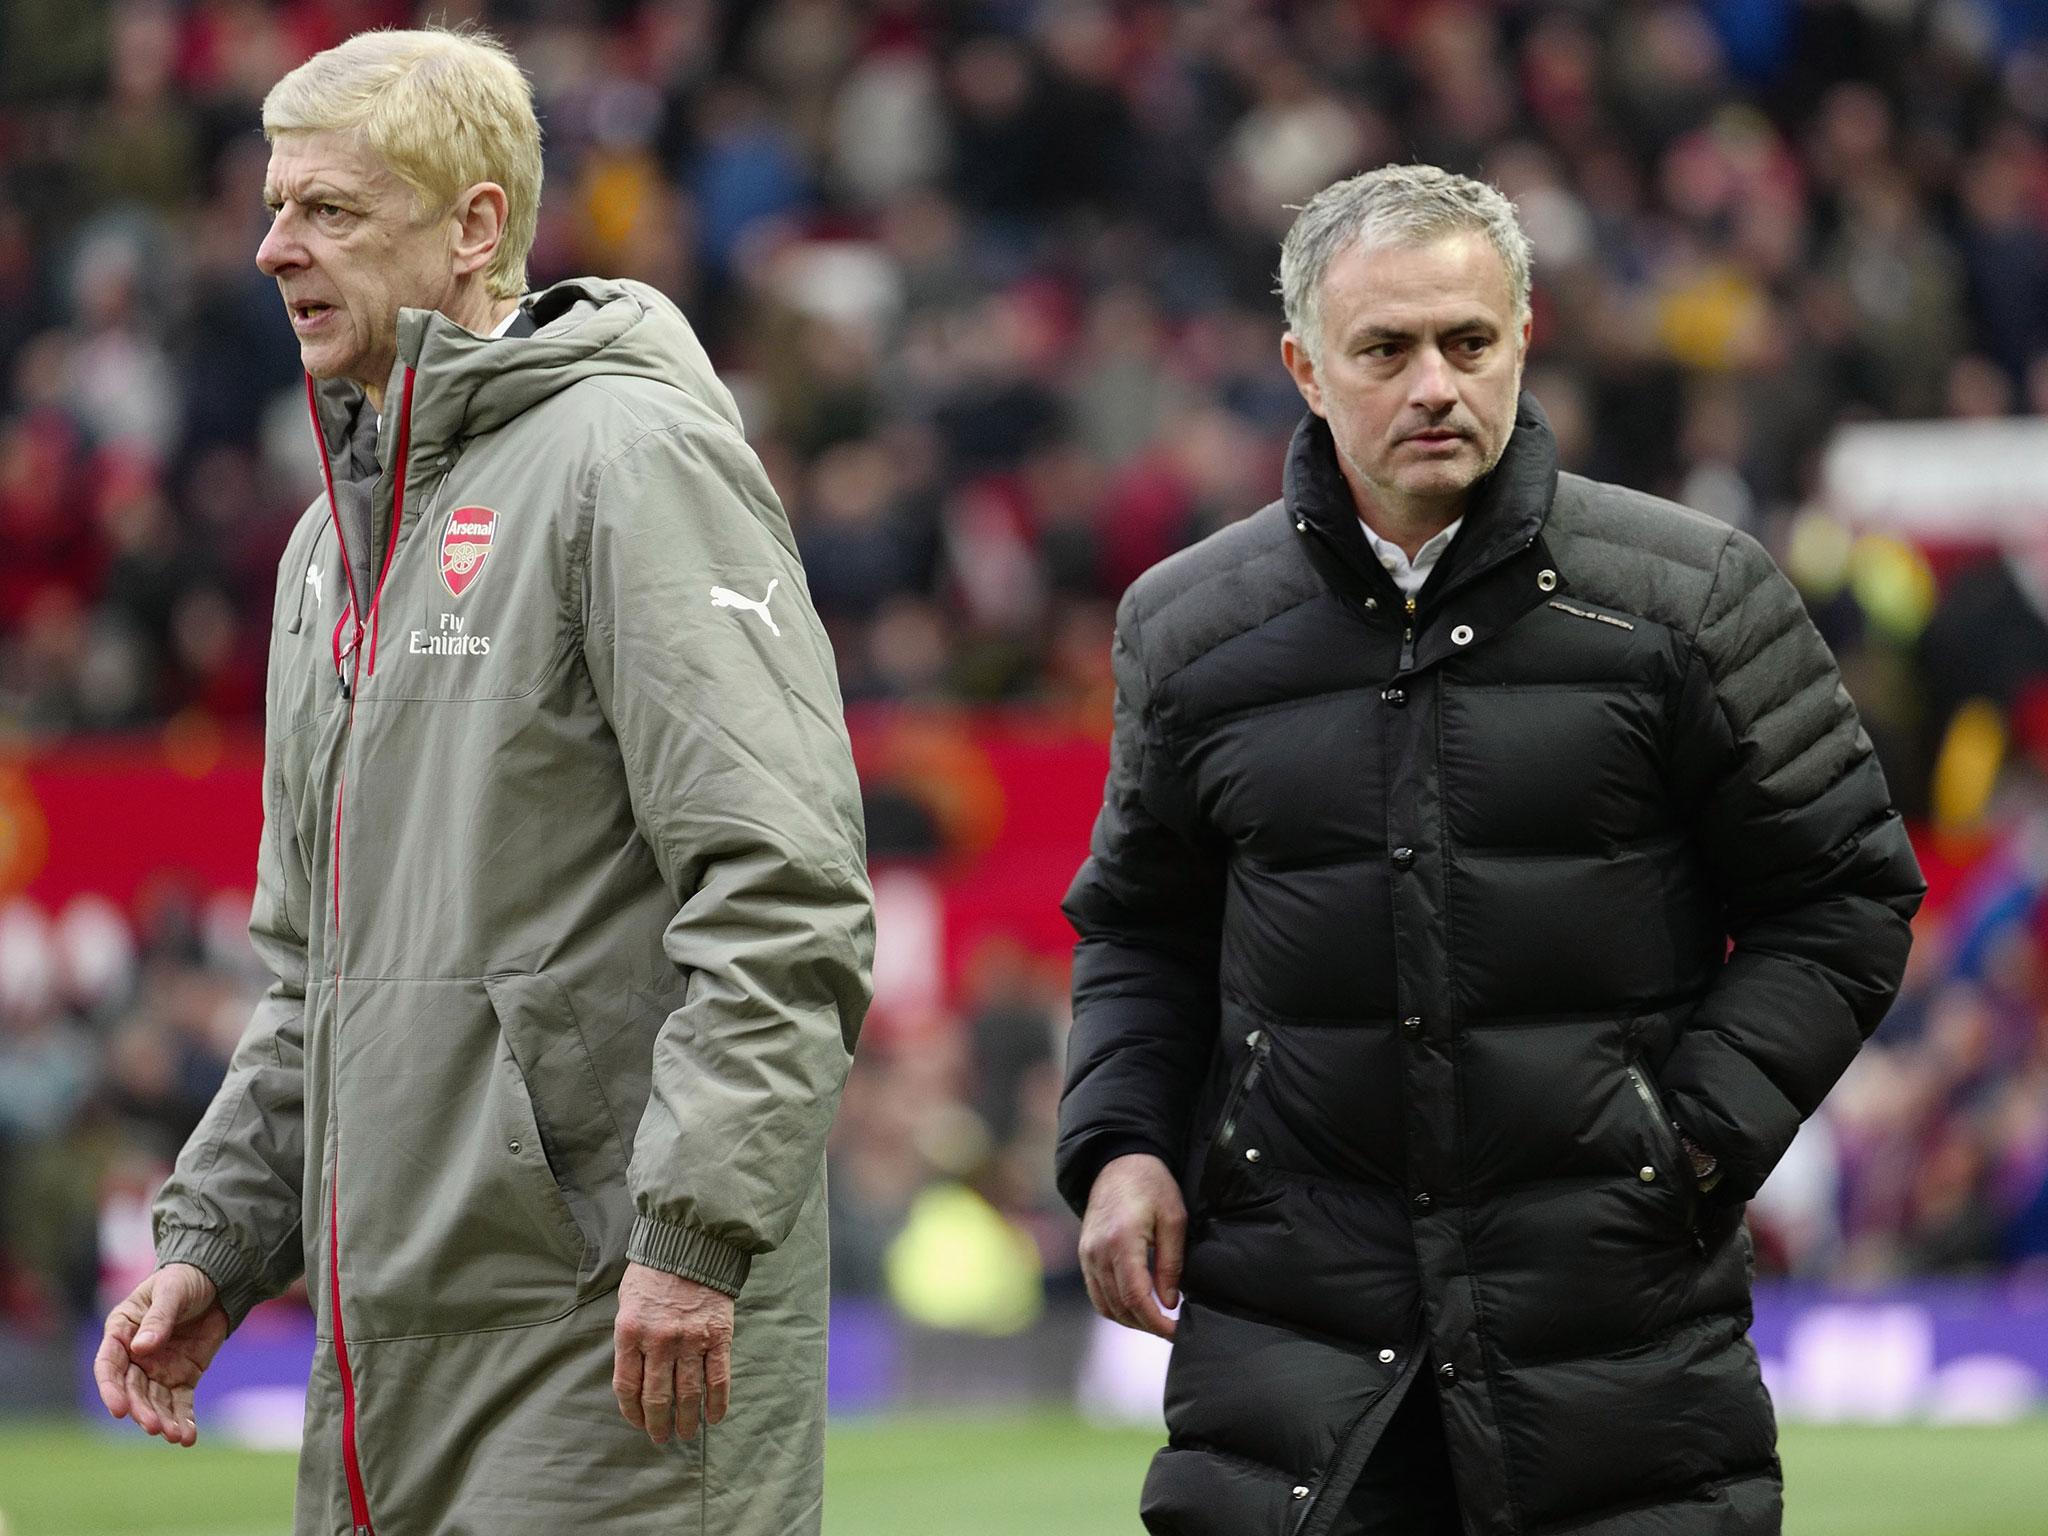 Arsene Wenger and Jose Mourinho have 'no problems', according to the Manchester United manager